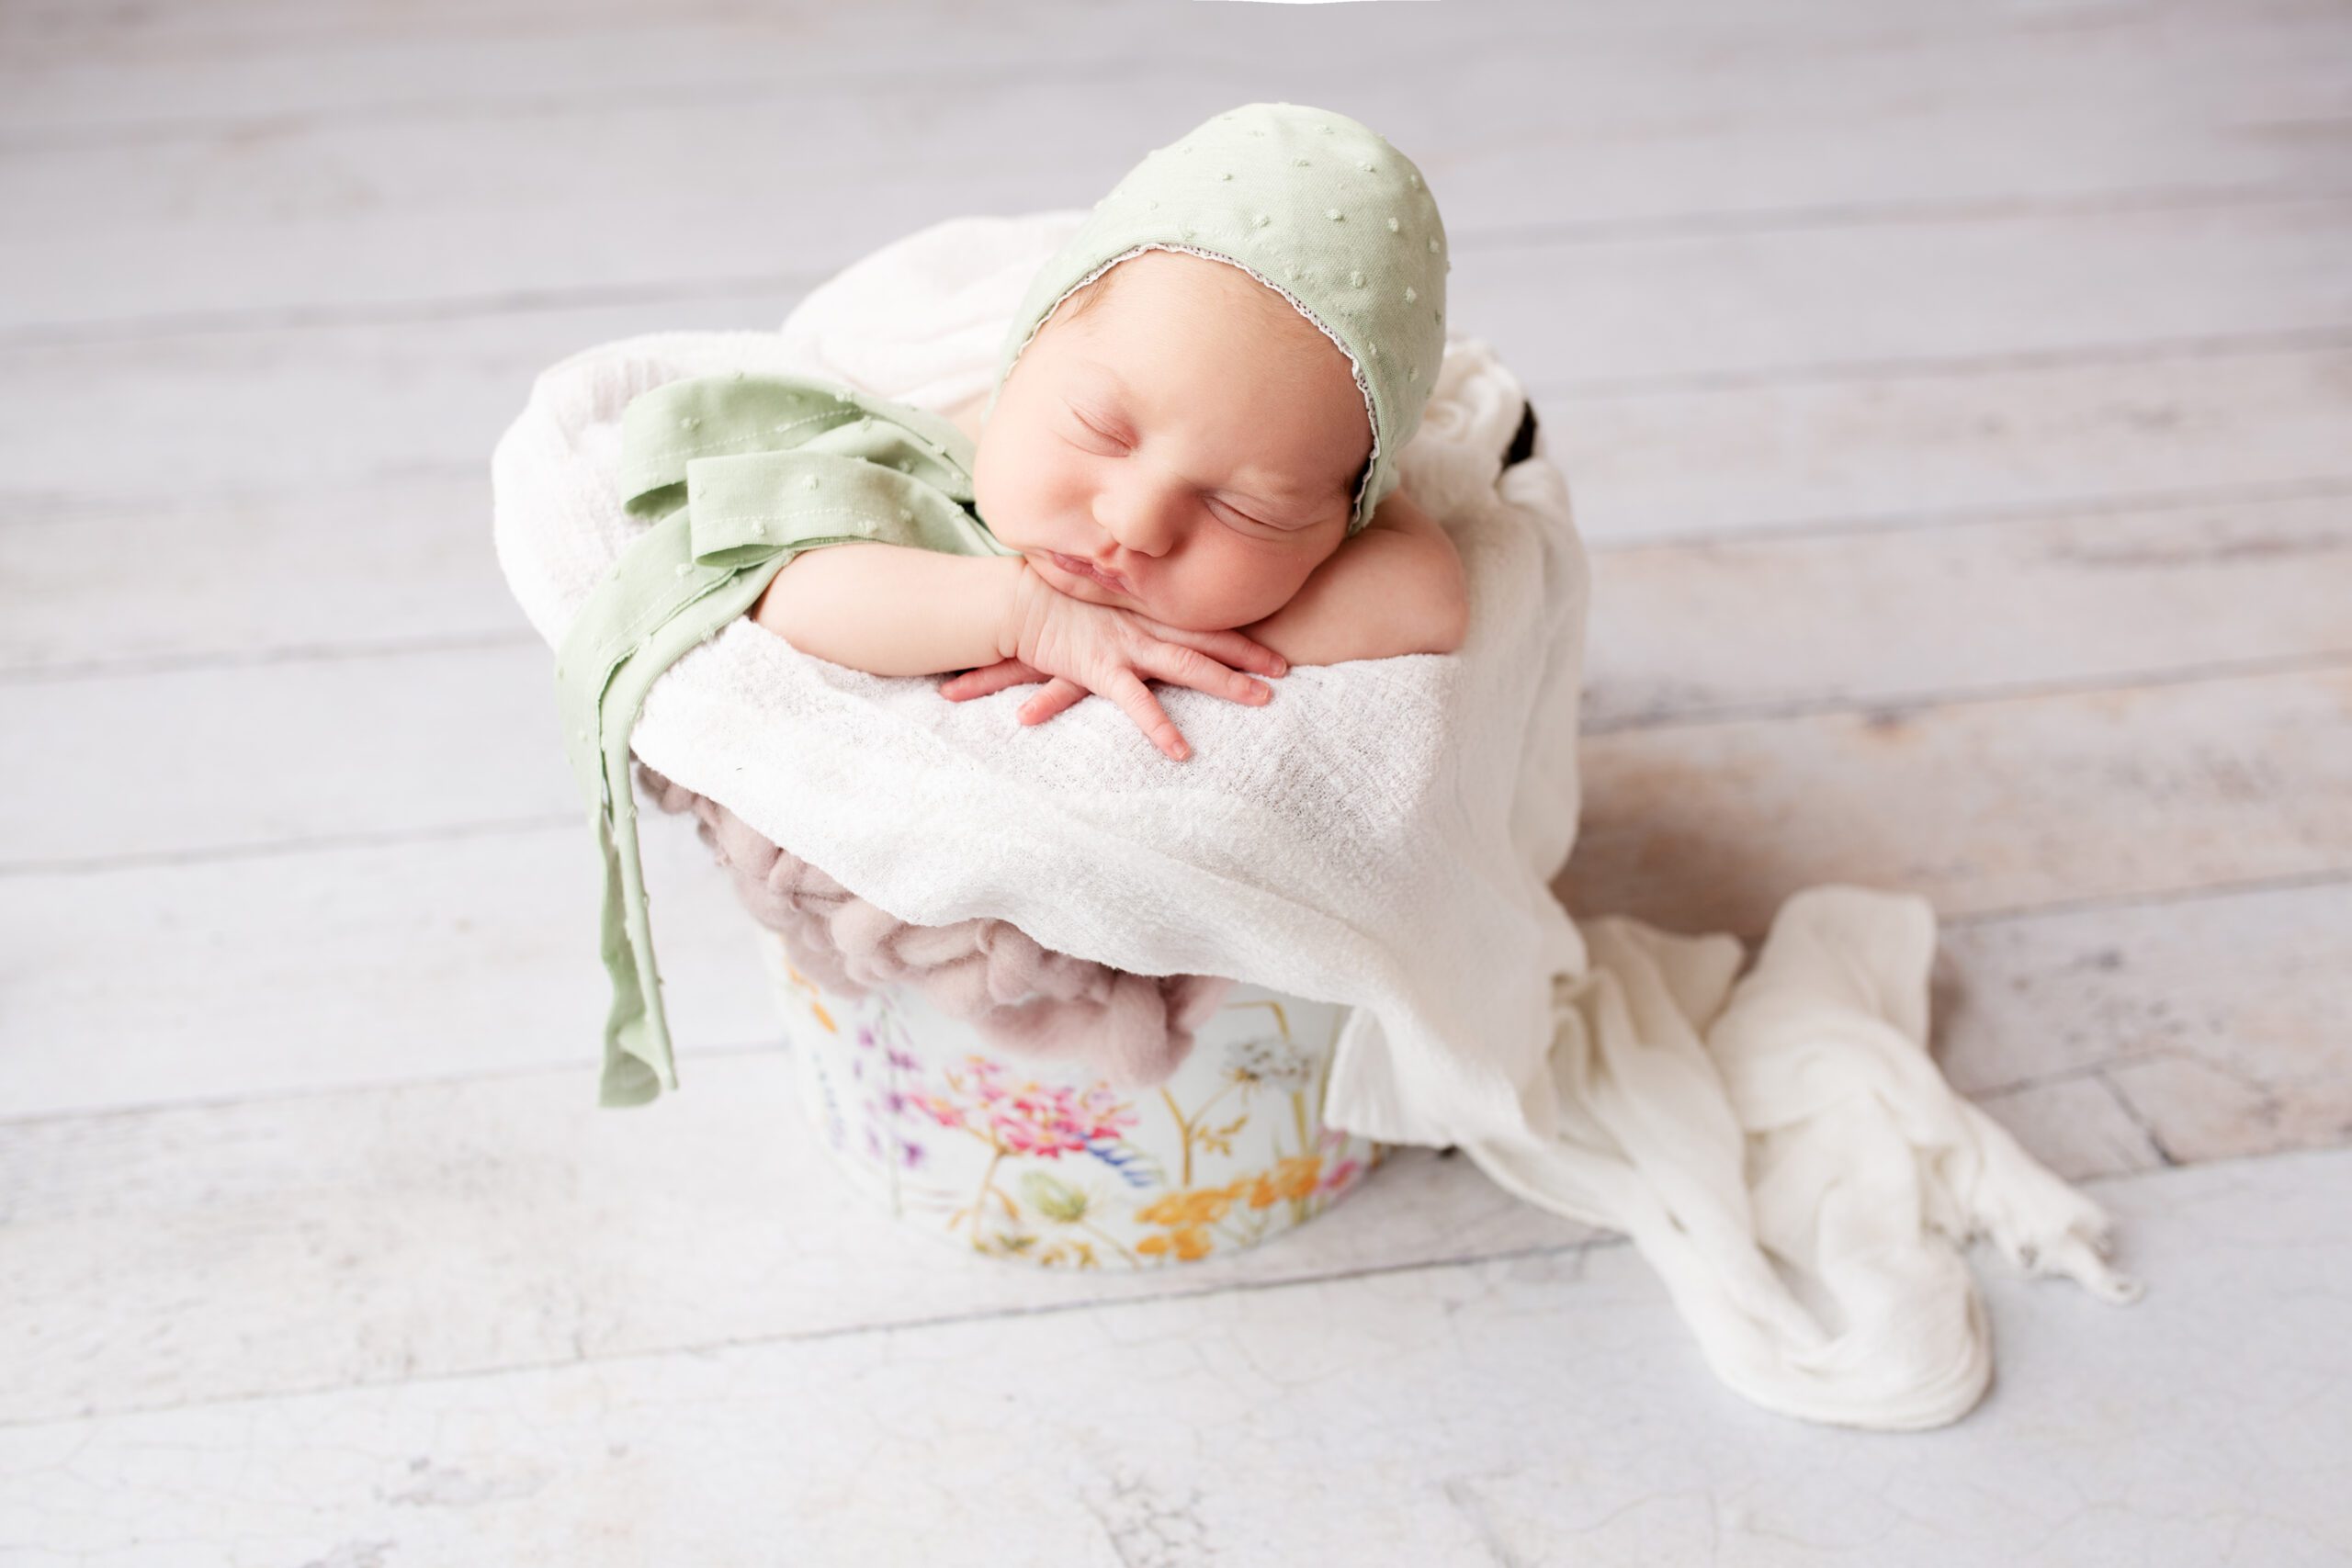 newborn girl in a bucket sleeping. her chin is resting on her hands. she is wearing a sage green bonnet. the bucket has a floral print on it and is stuffed with light purple and cream fabrics.